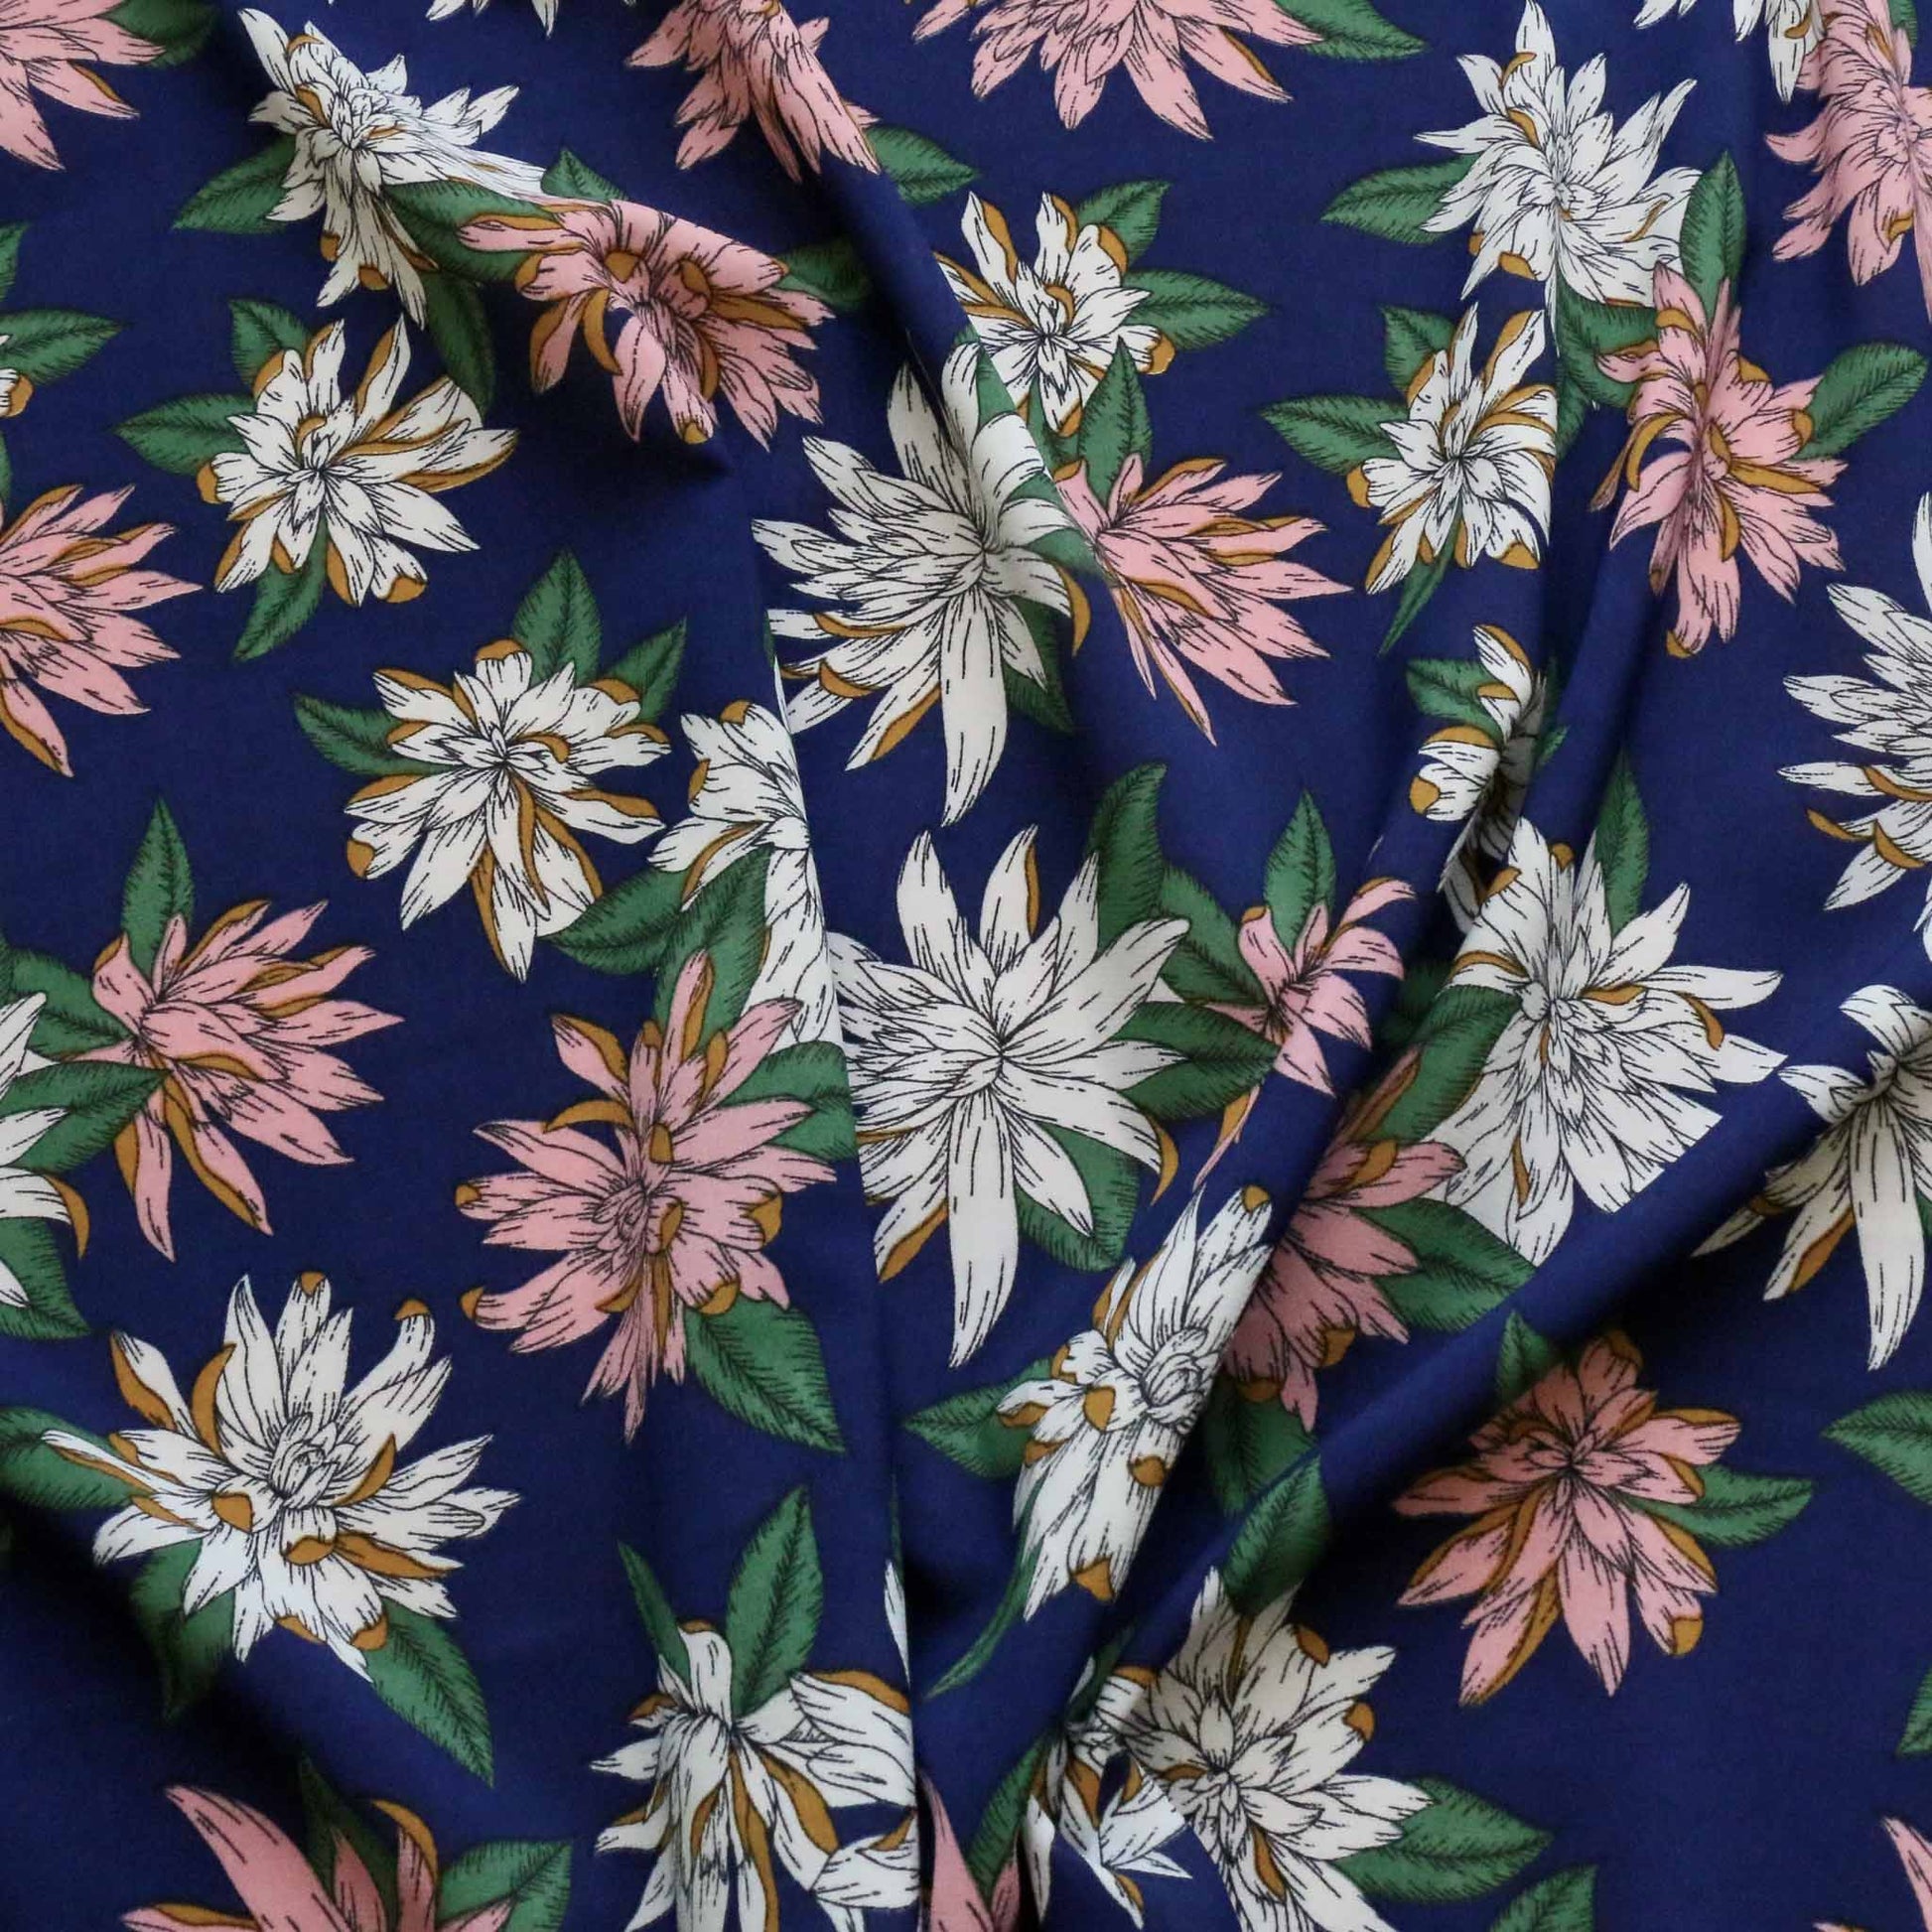 blue chiffon polyester synthetic dressmaking fabric with pink and white flower design print